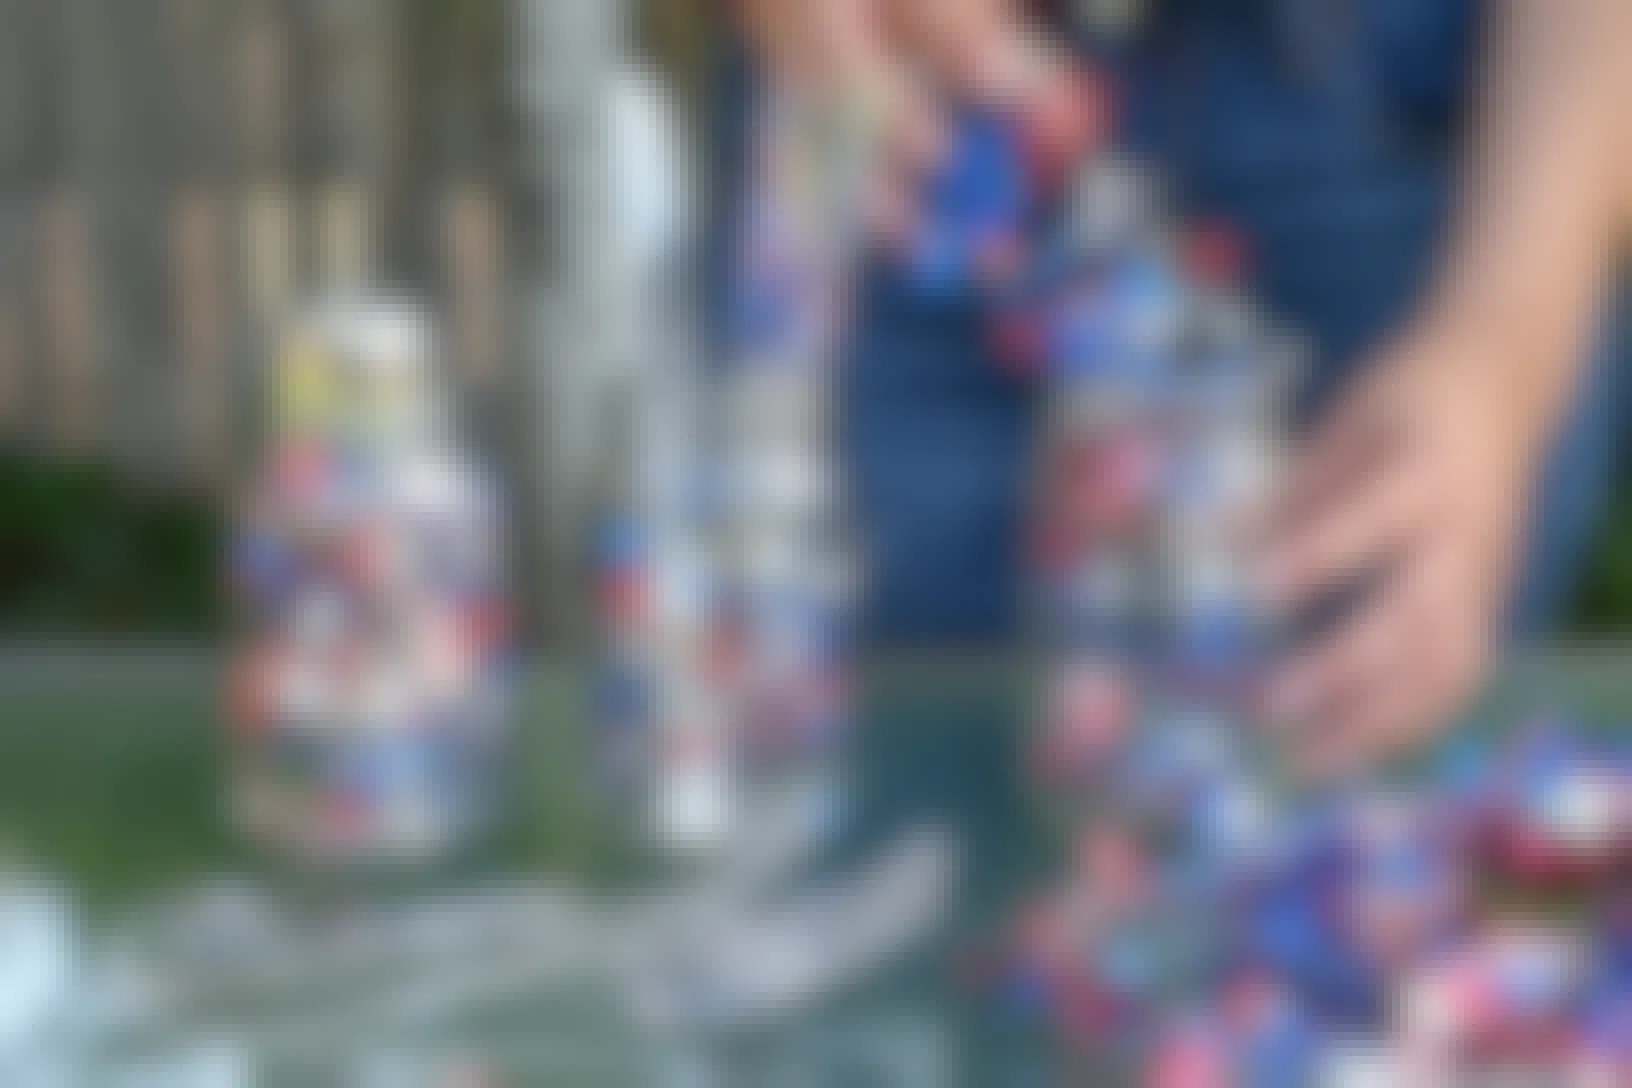 A person putting red, white, and blue spiral garland into mason jars for a decorative place for silverware.